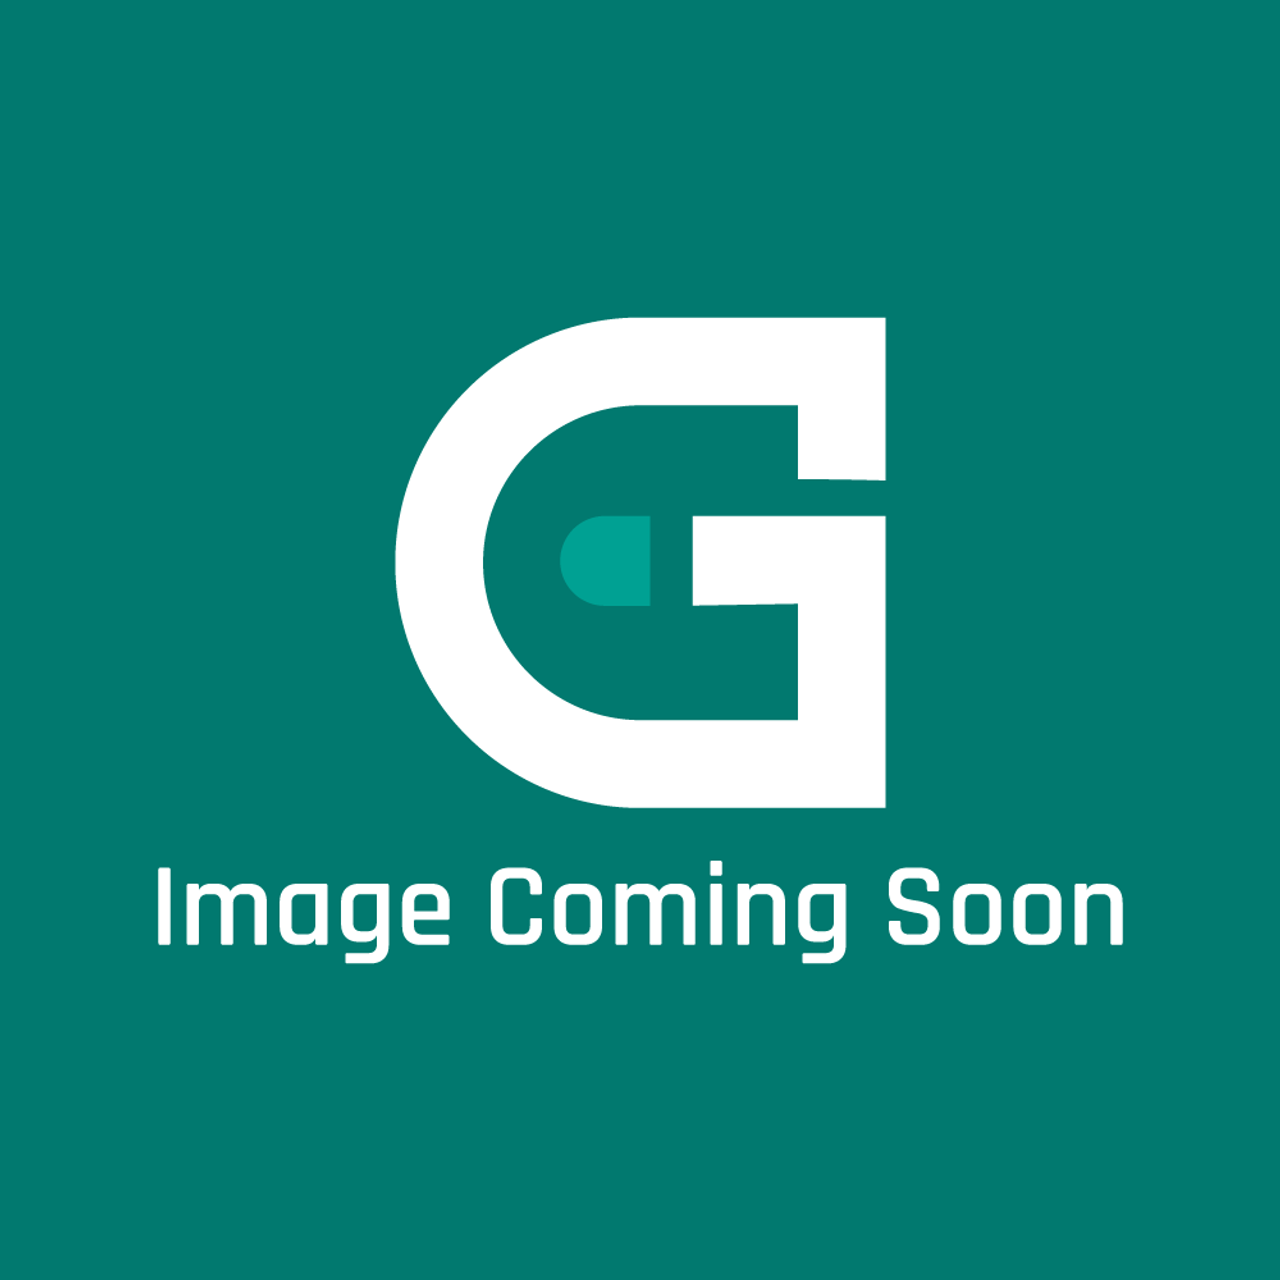 Frigidaire - Electrolux 5304525525 Front Panel - Image Coming Soon!